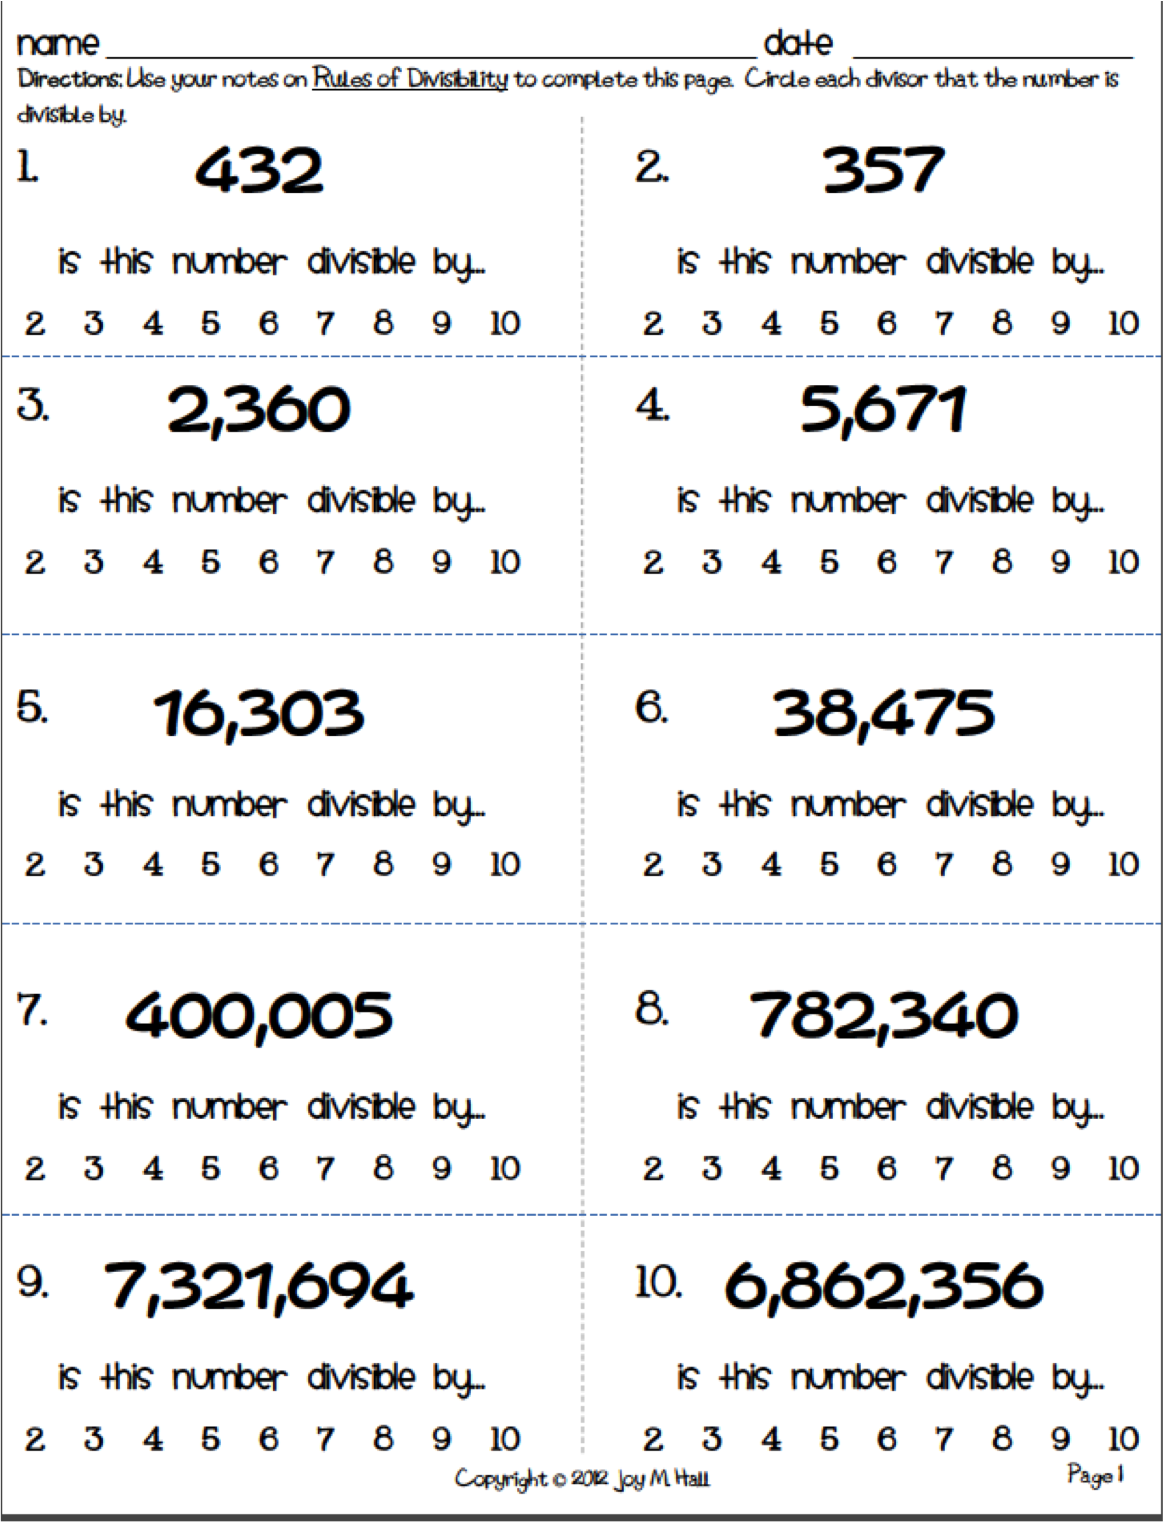 divisibility-rules-worksheet-pdf-amulette